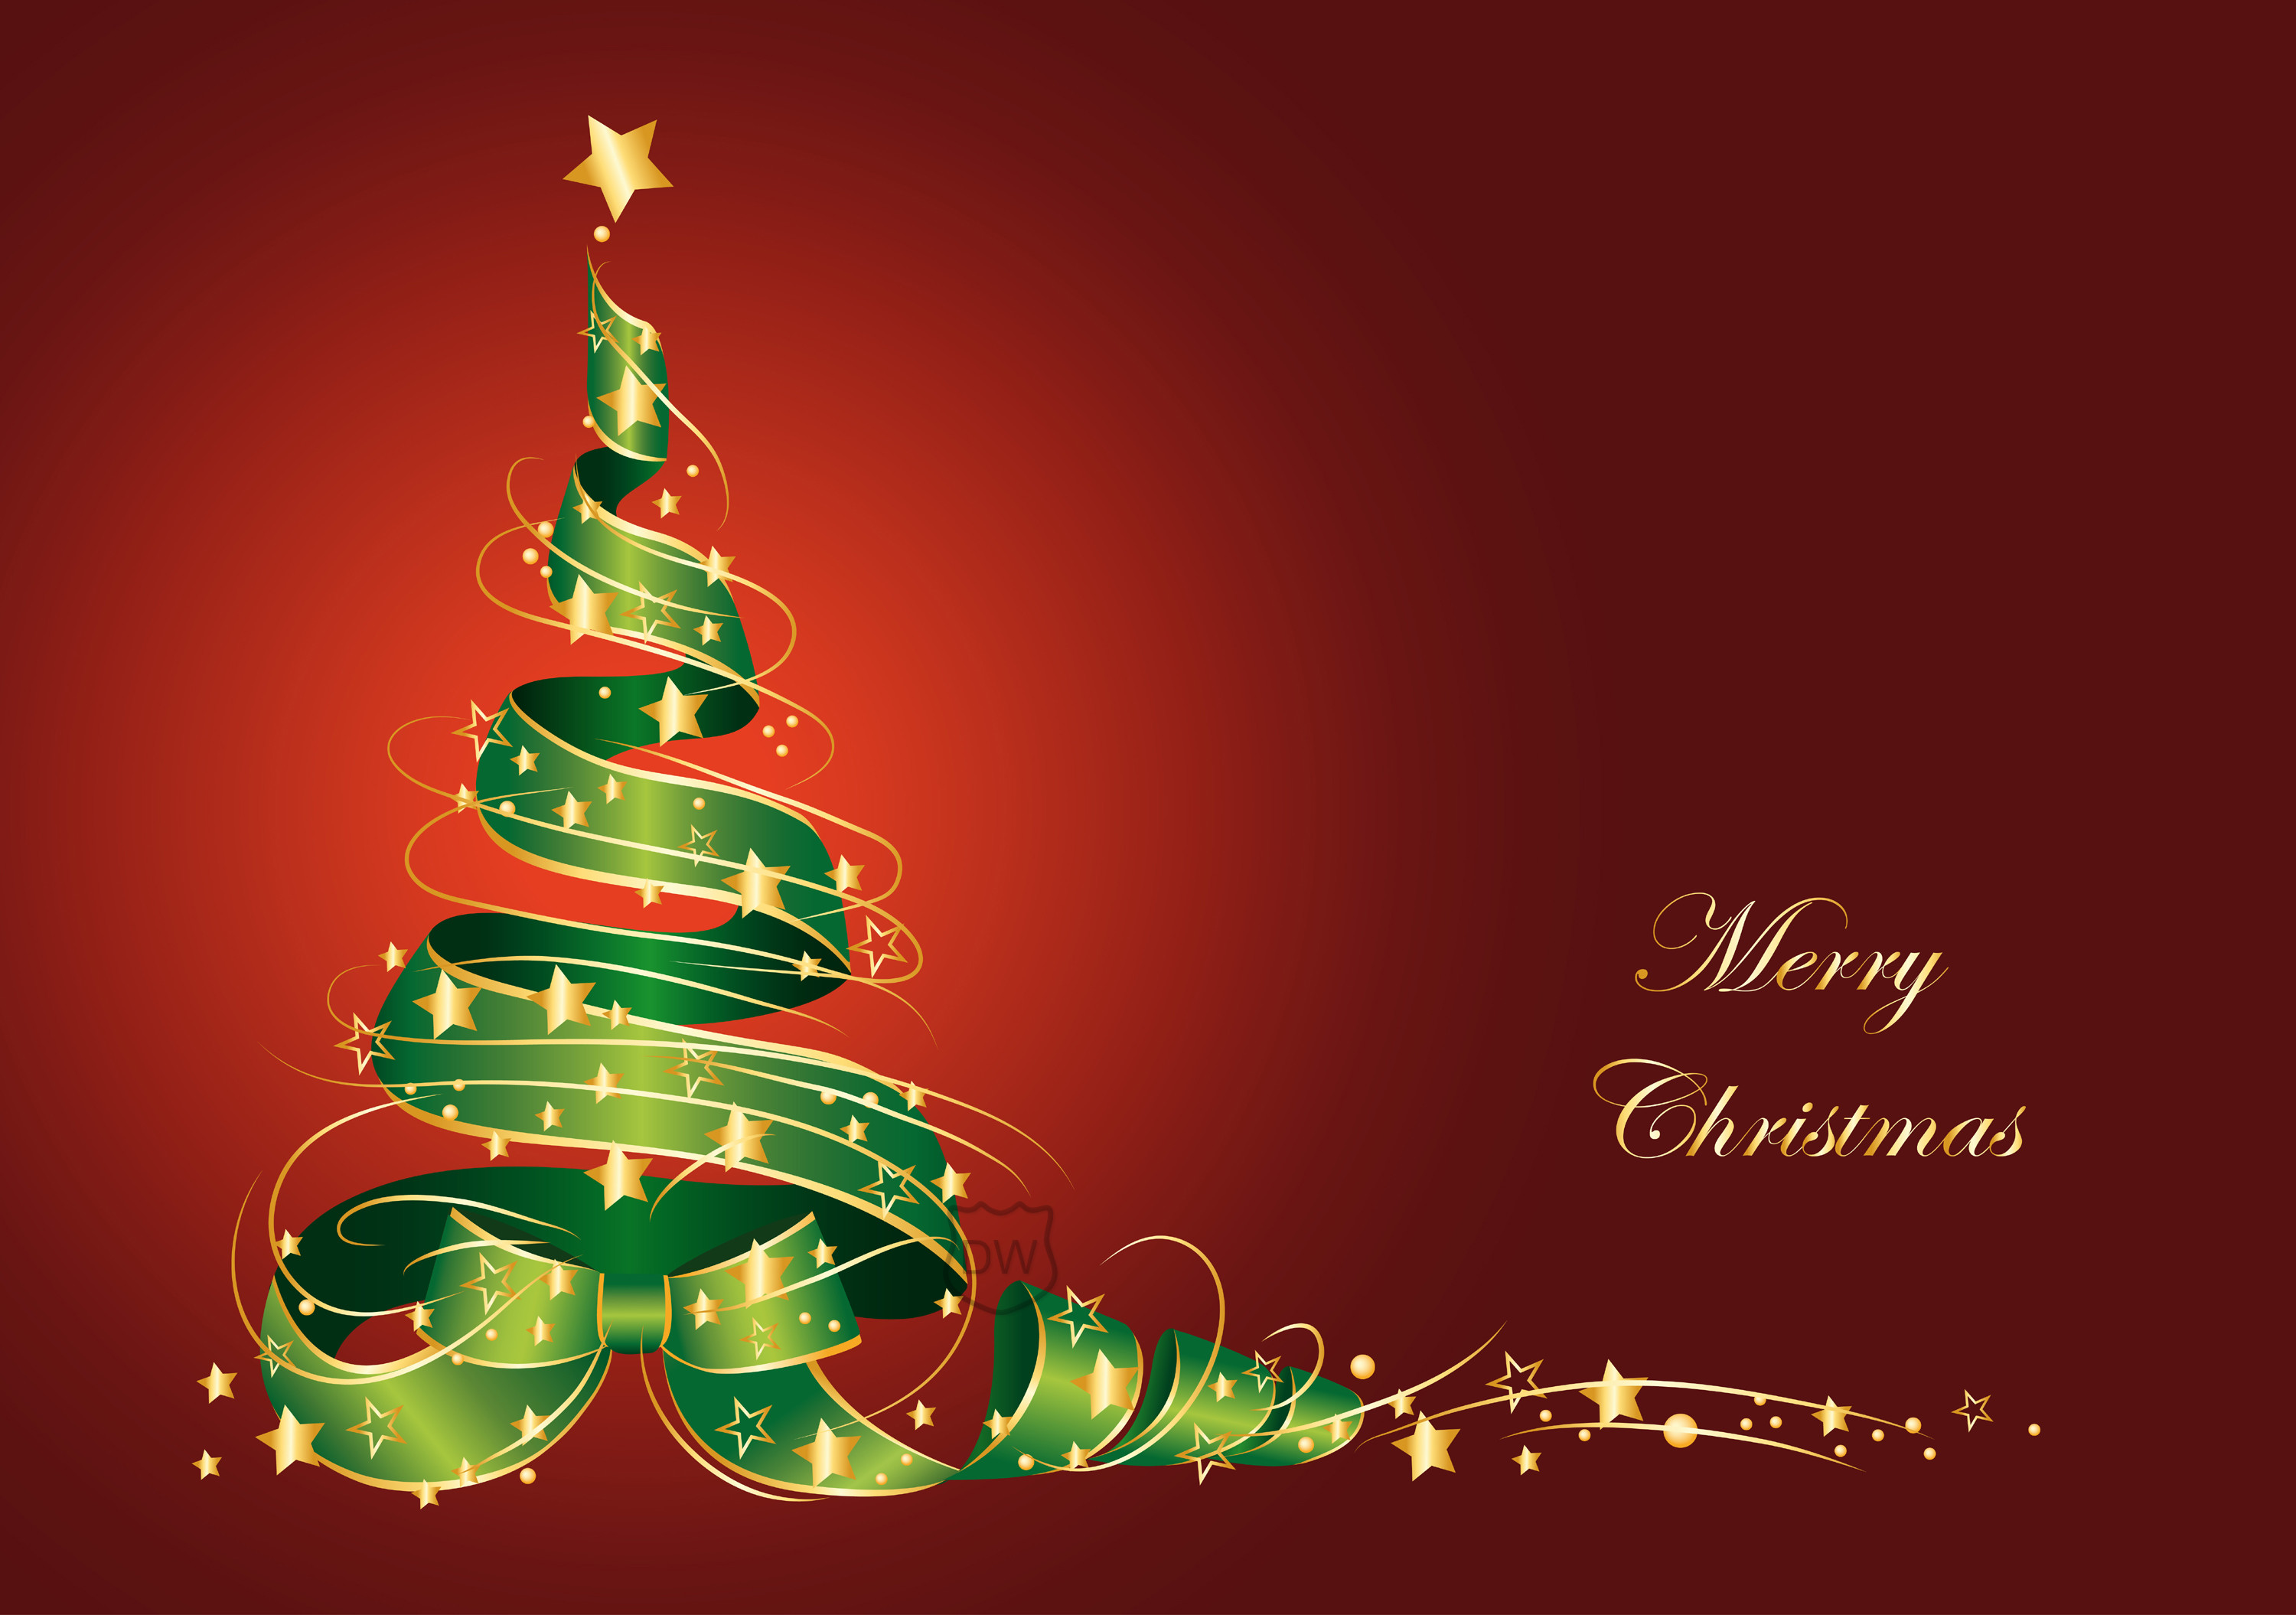 3000x2110 Merry Christmas 2014 Hd Background Wallpaper 39 HD Wallpapers